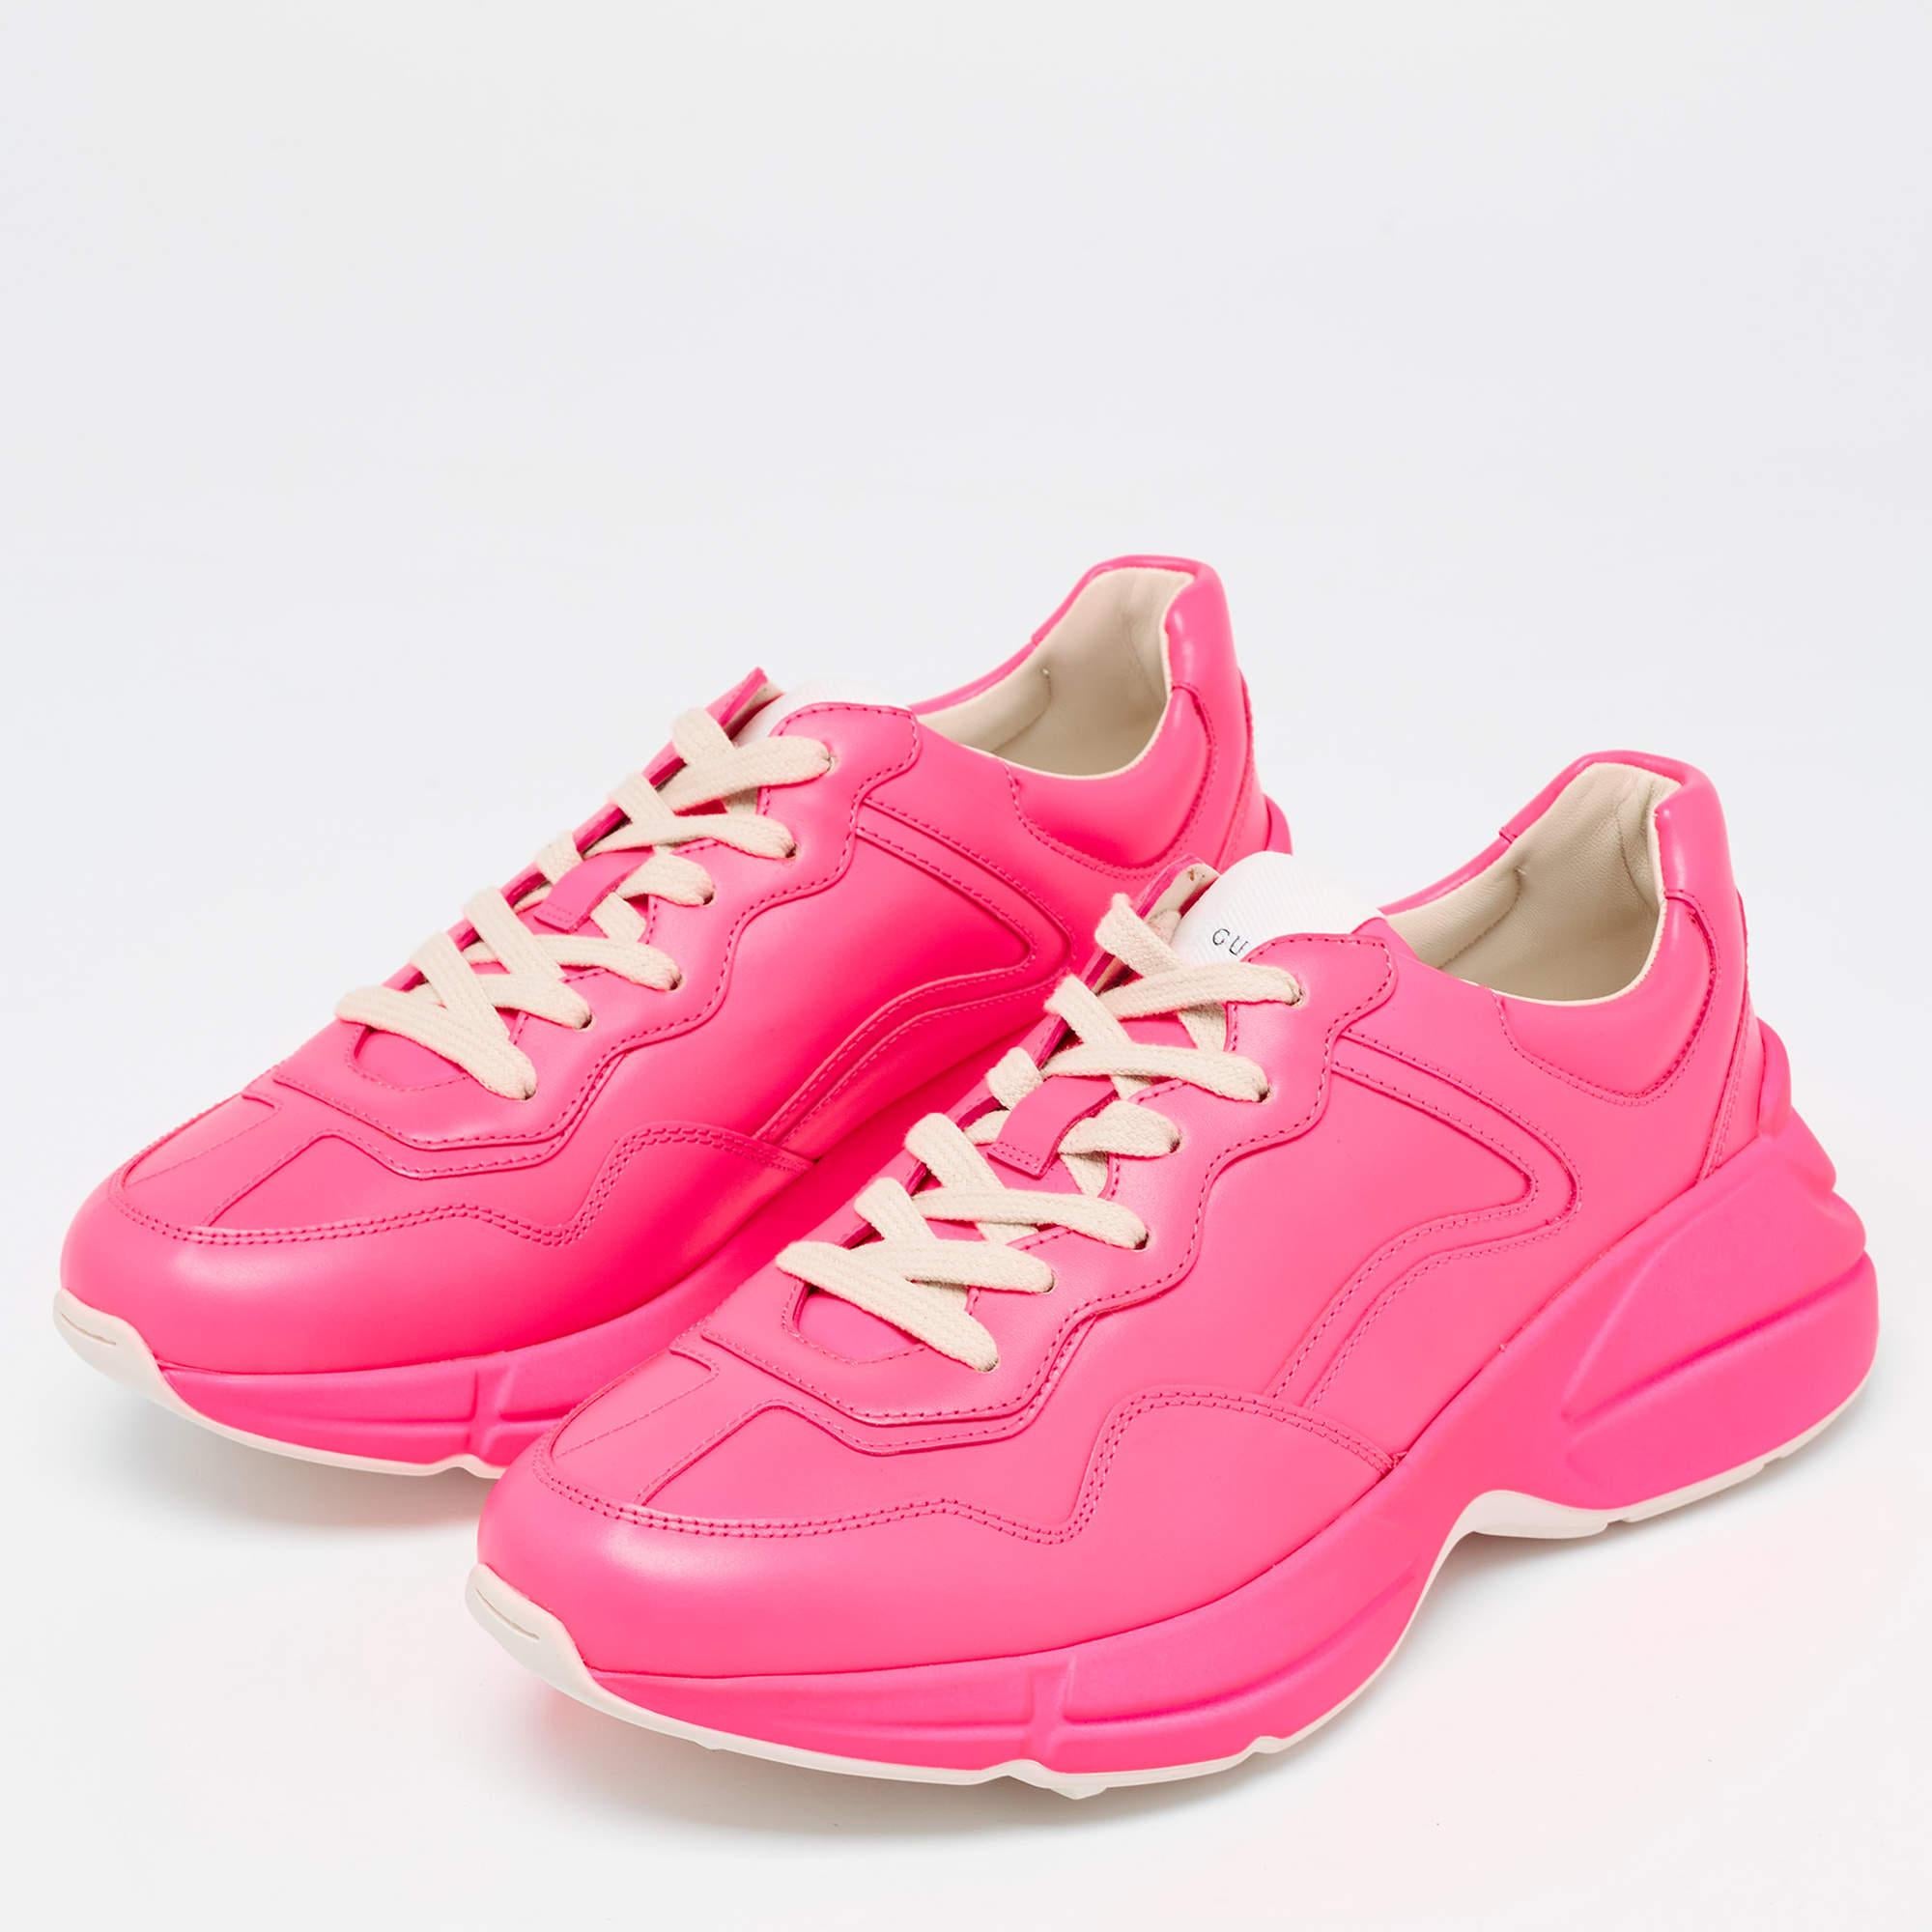 Gucci Neon Pink Leather Rhyton Sneakers Size 39 For Sale 4